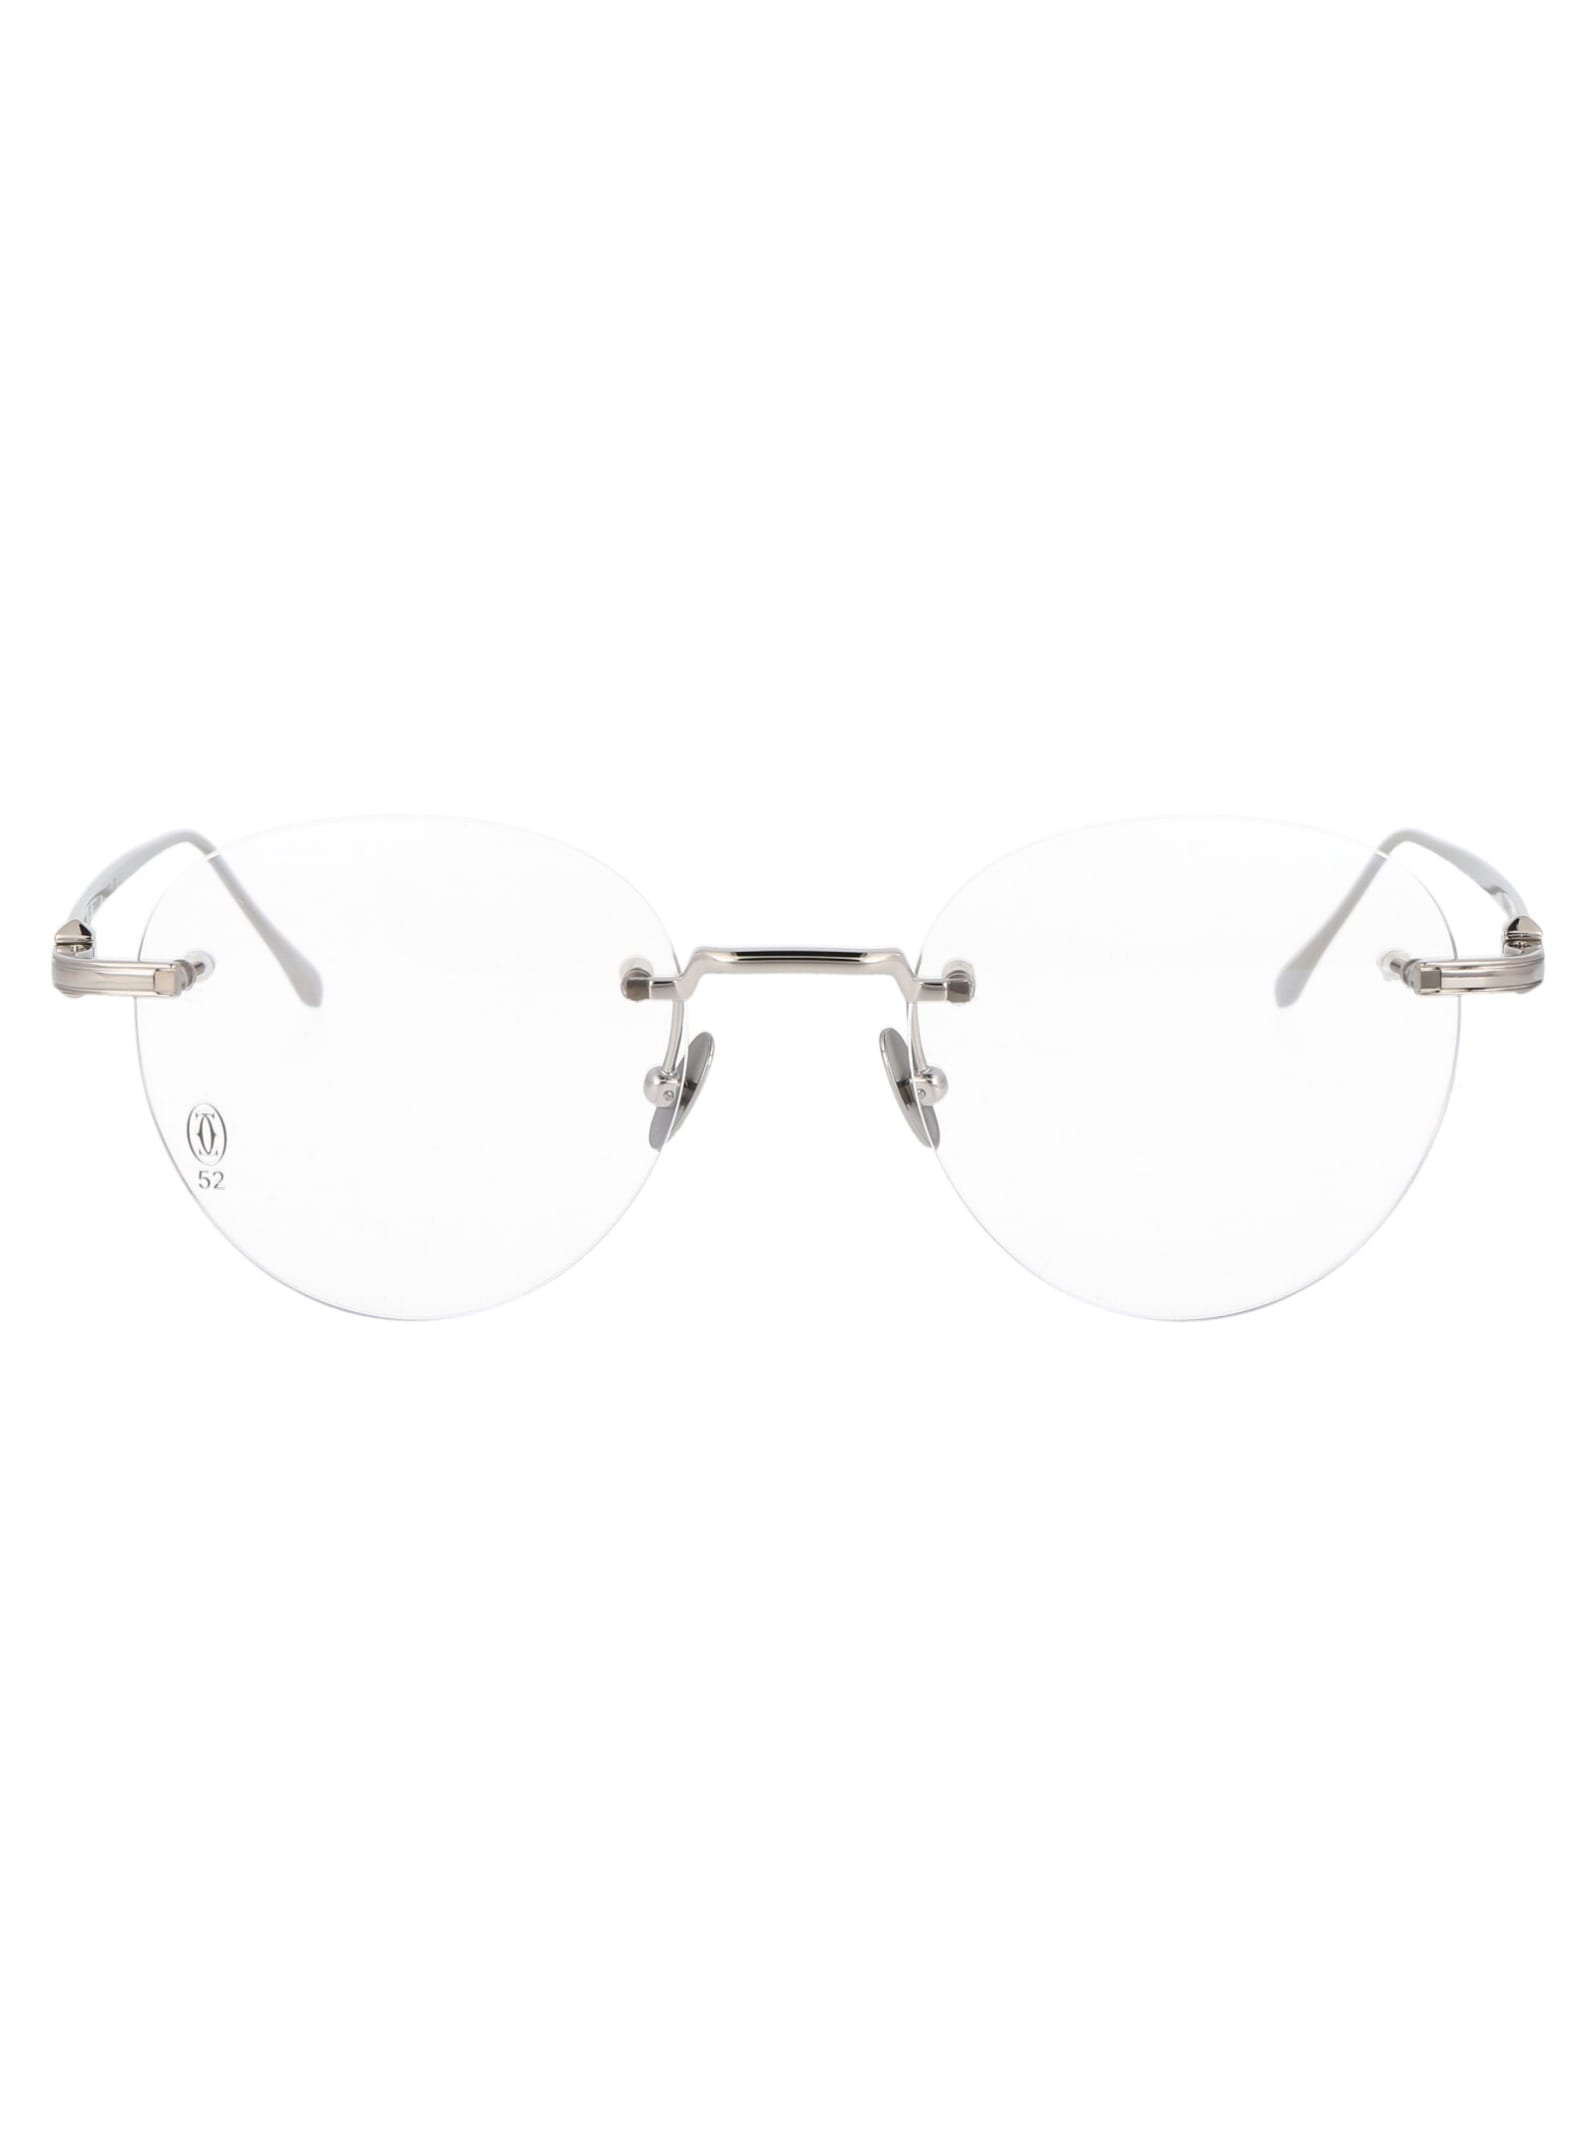 Shop Cartier Ct0342o Glasses In 001 Silver Silver Transparent